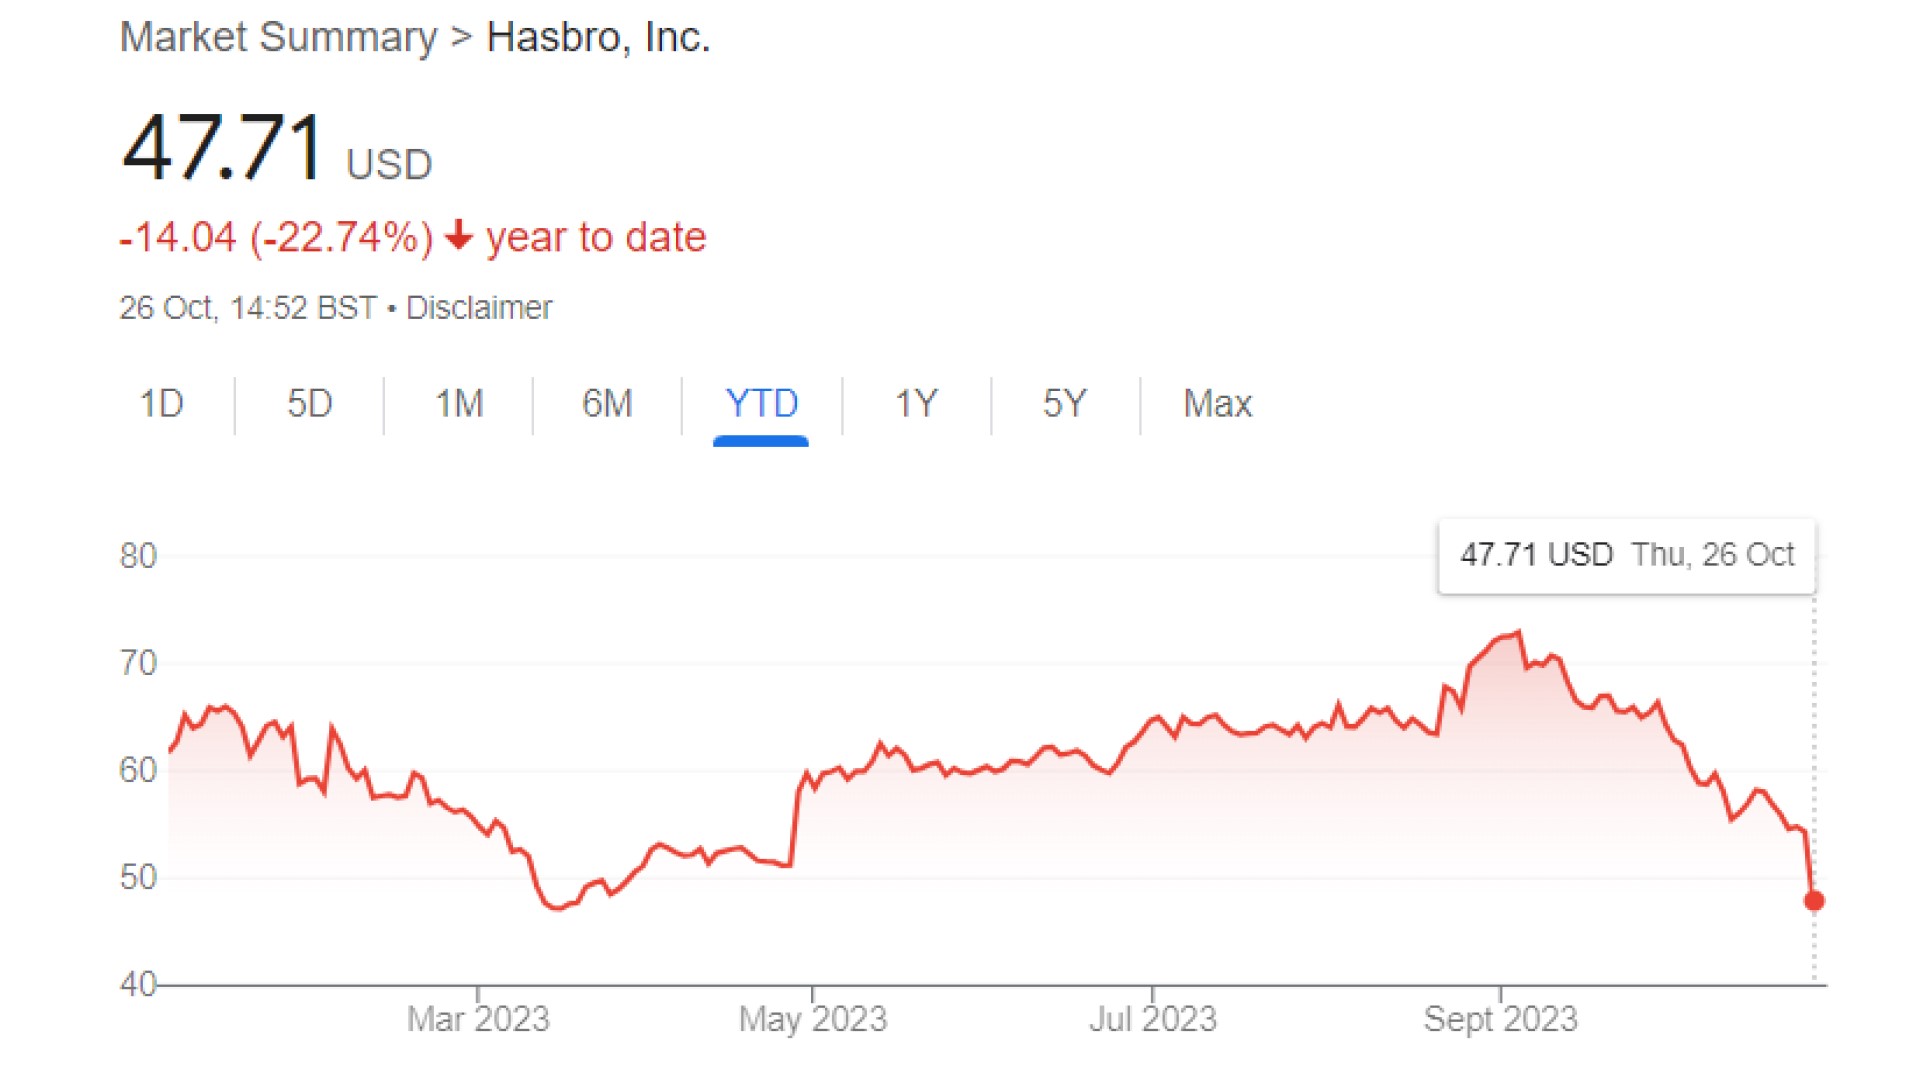 Will digital content lift Hasbro and Games Workshop share prices?